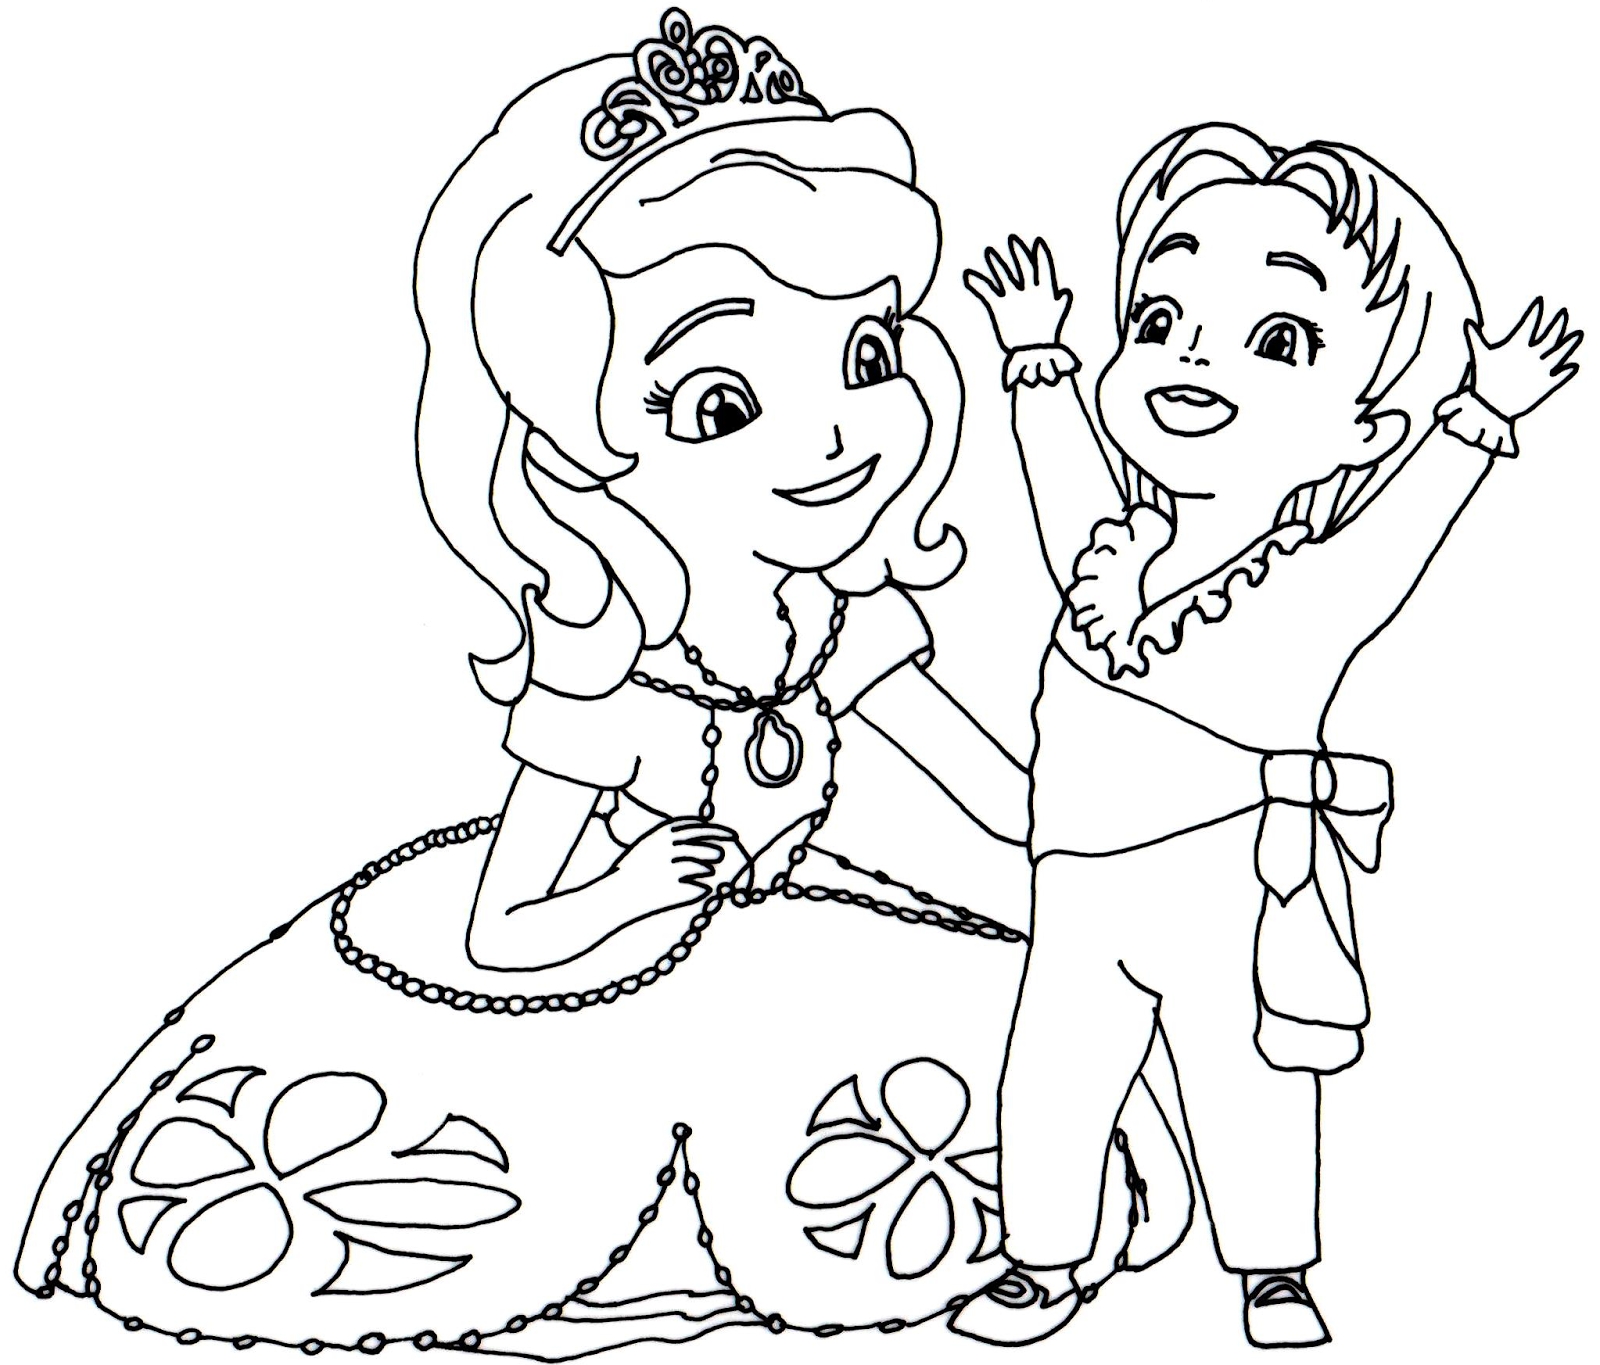 Sofia The First Disney Princess Coloring Pages at GetColorings.com ...